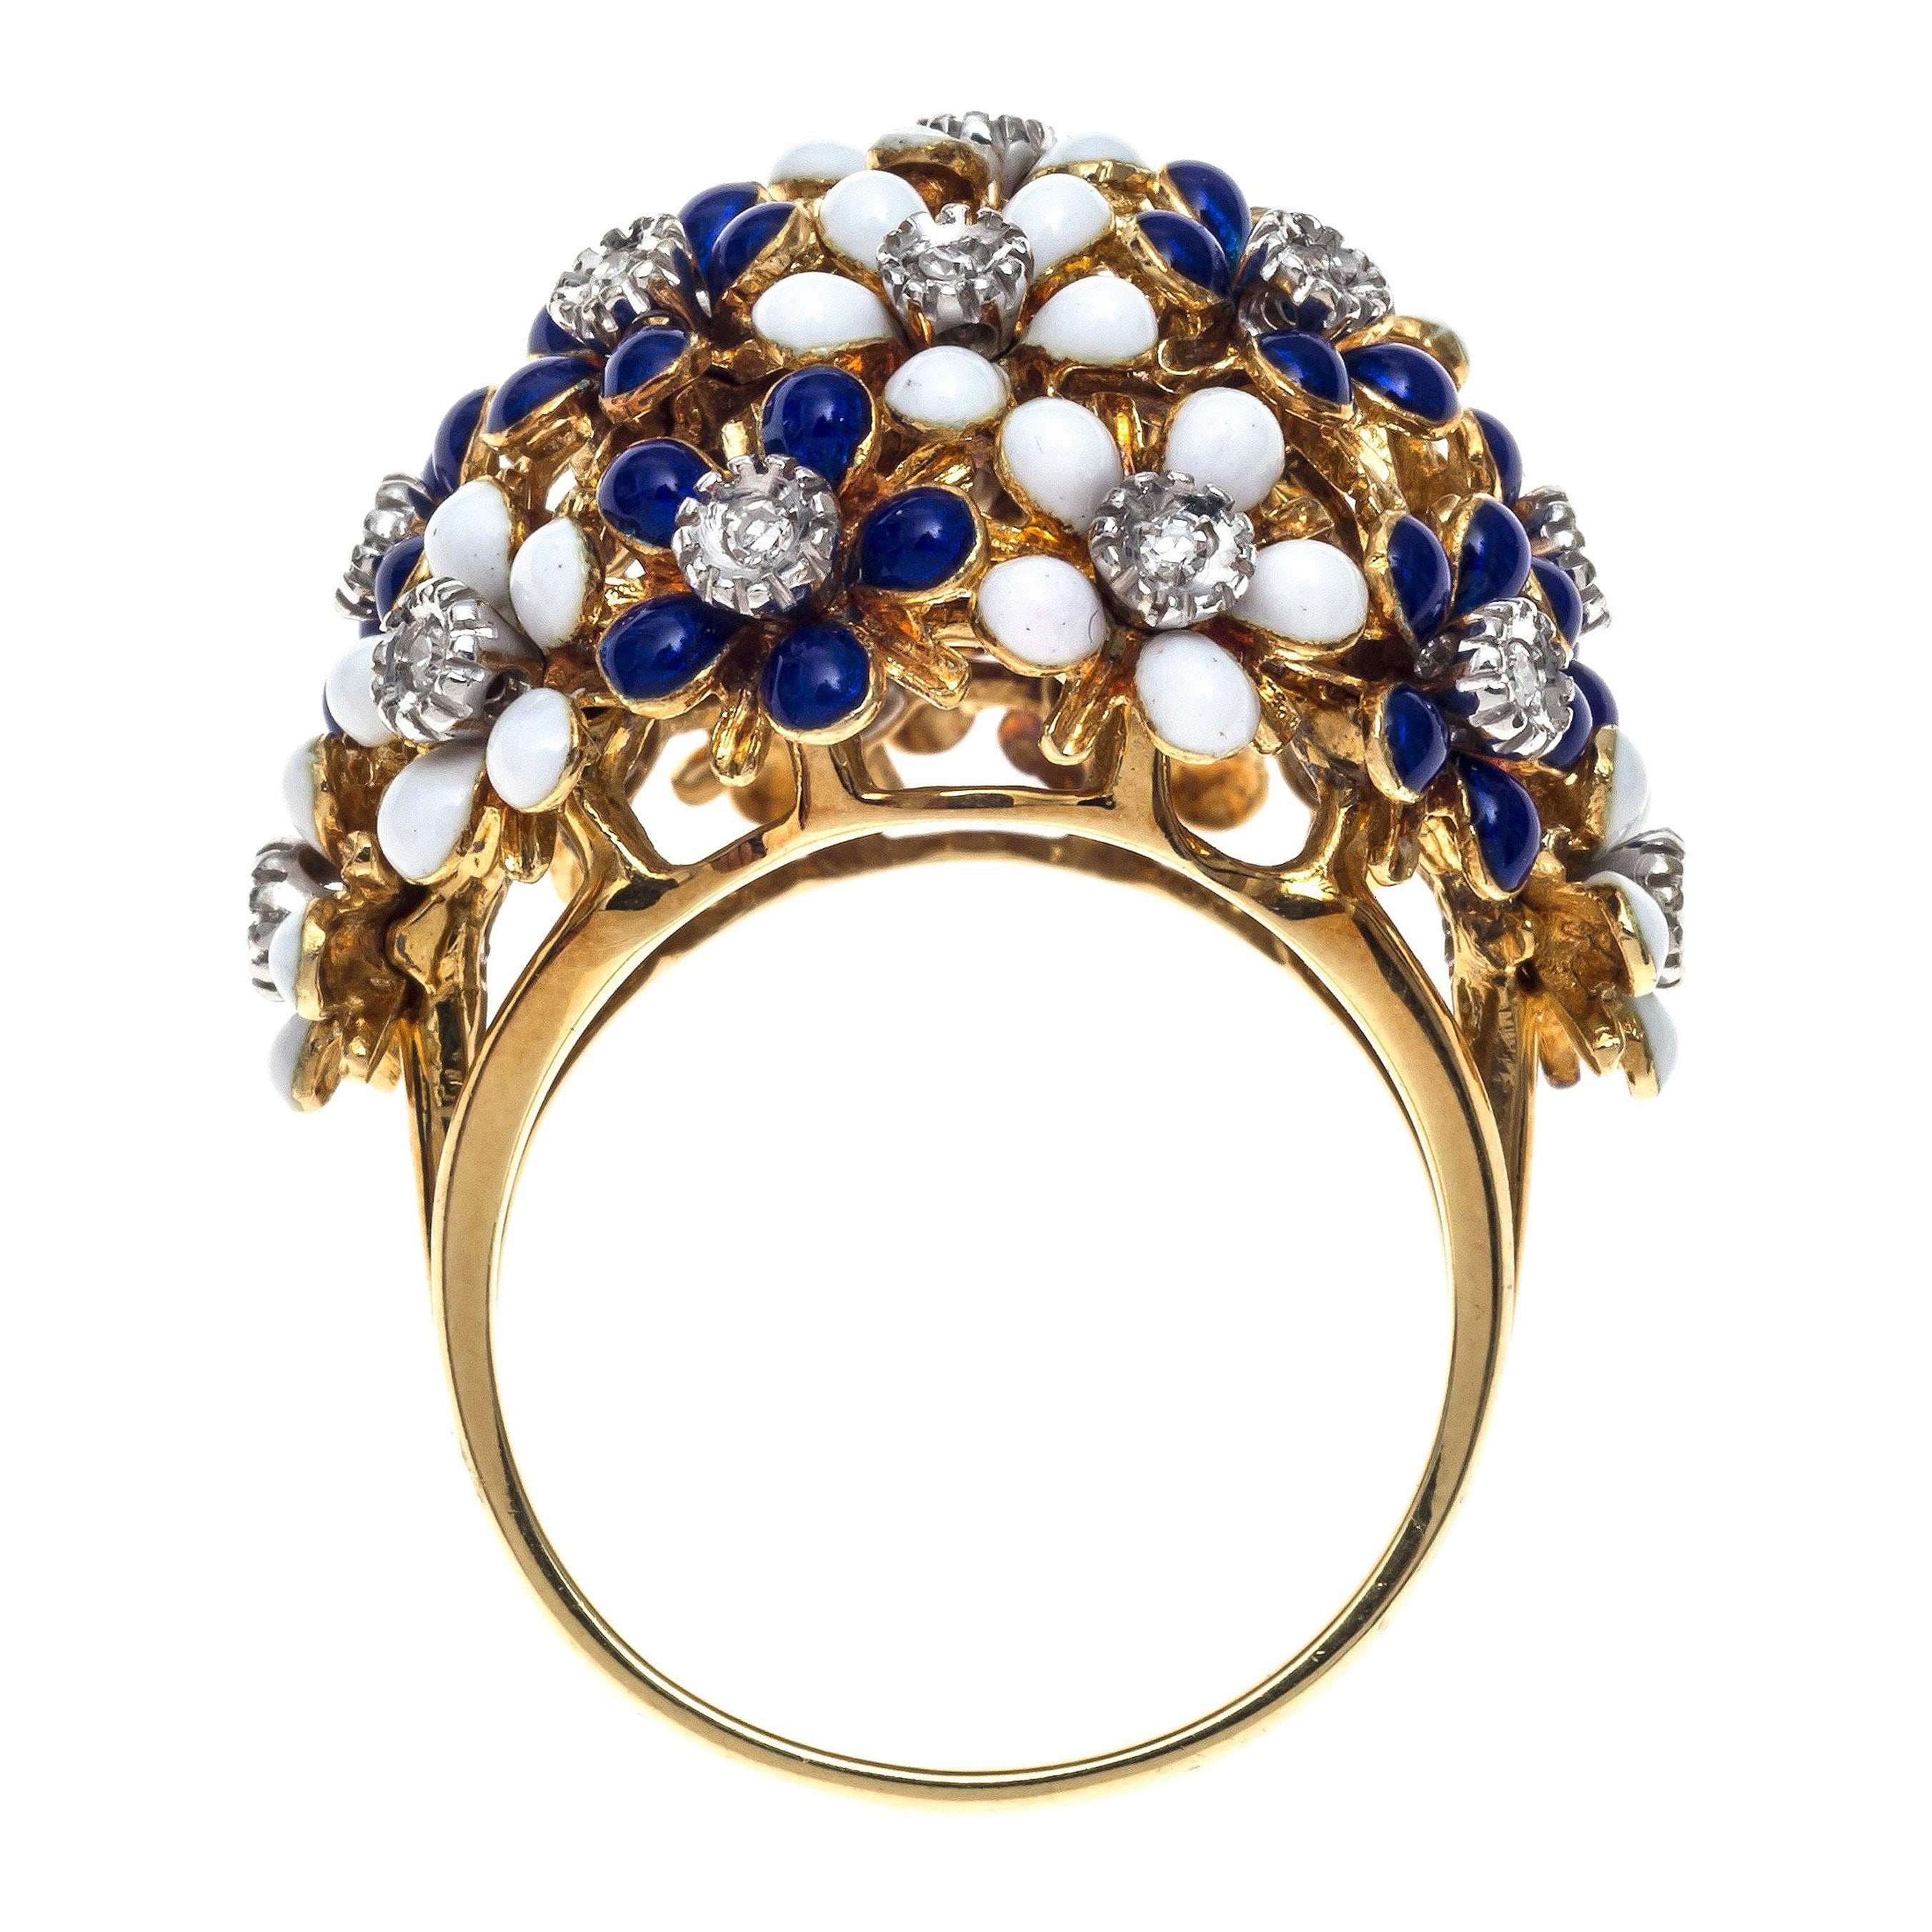 Vintage 18 Kt Gold Dome Shaped Cocktail Ring Blue White Enamel Flowers Diamond For Sale